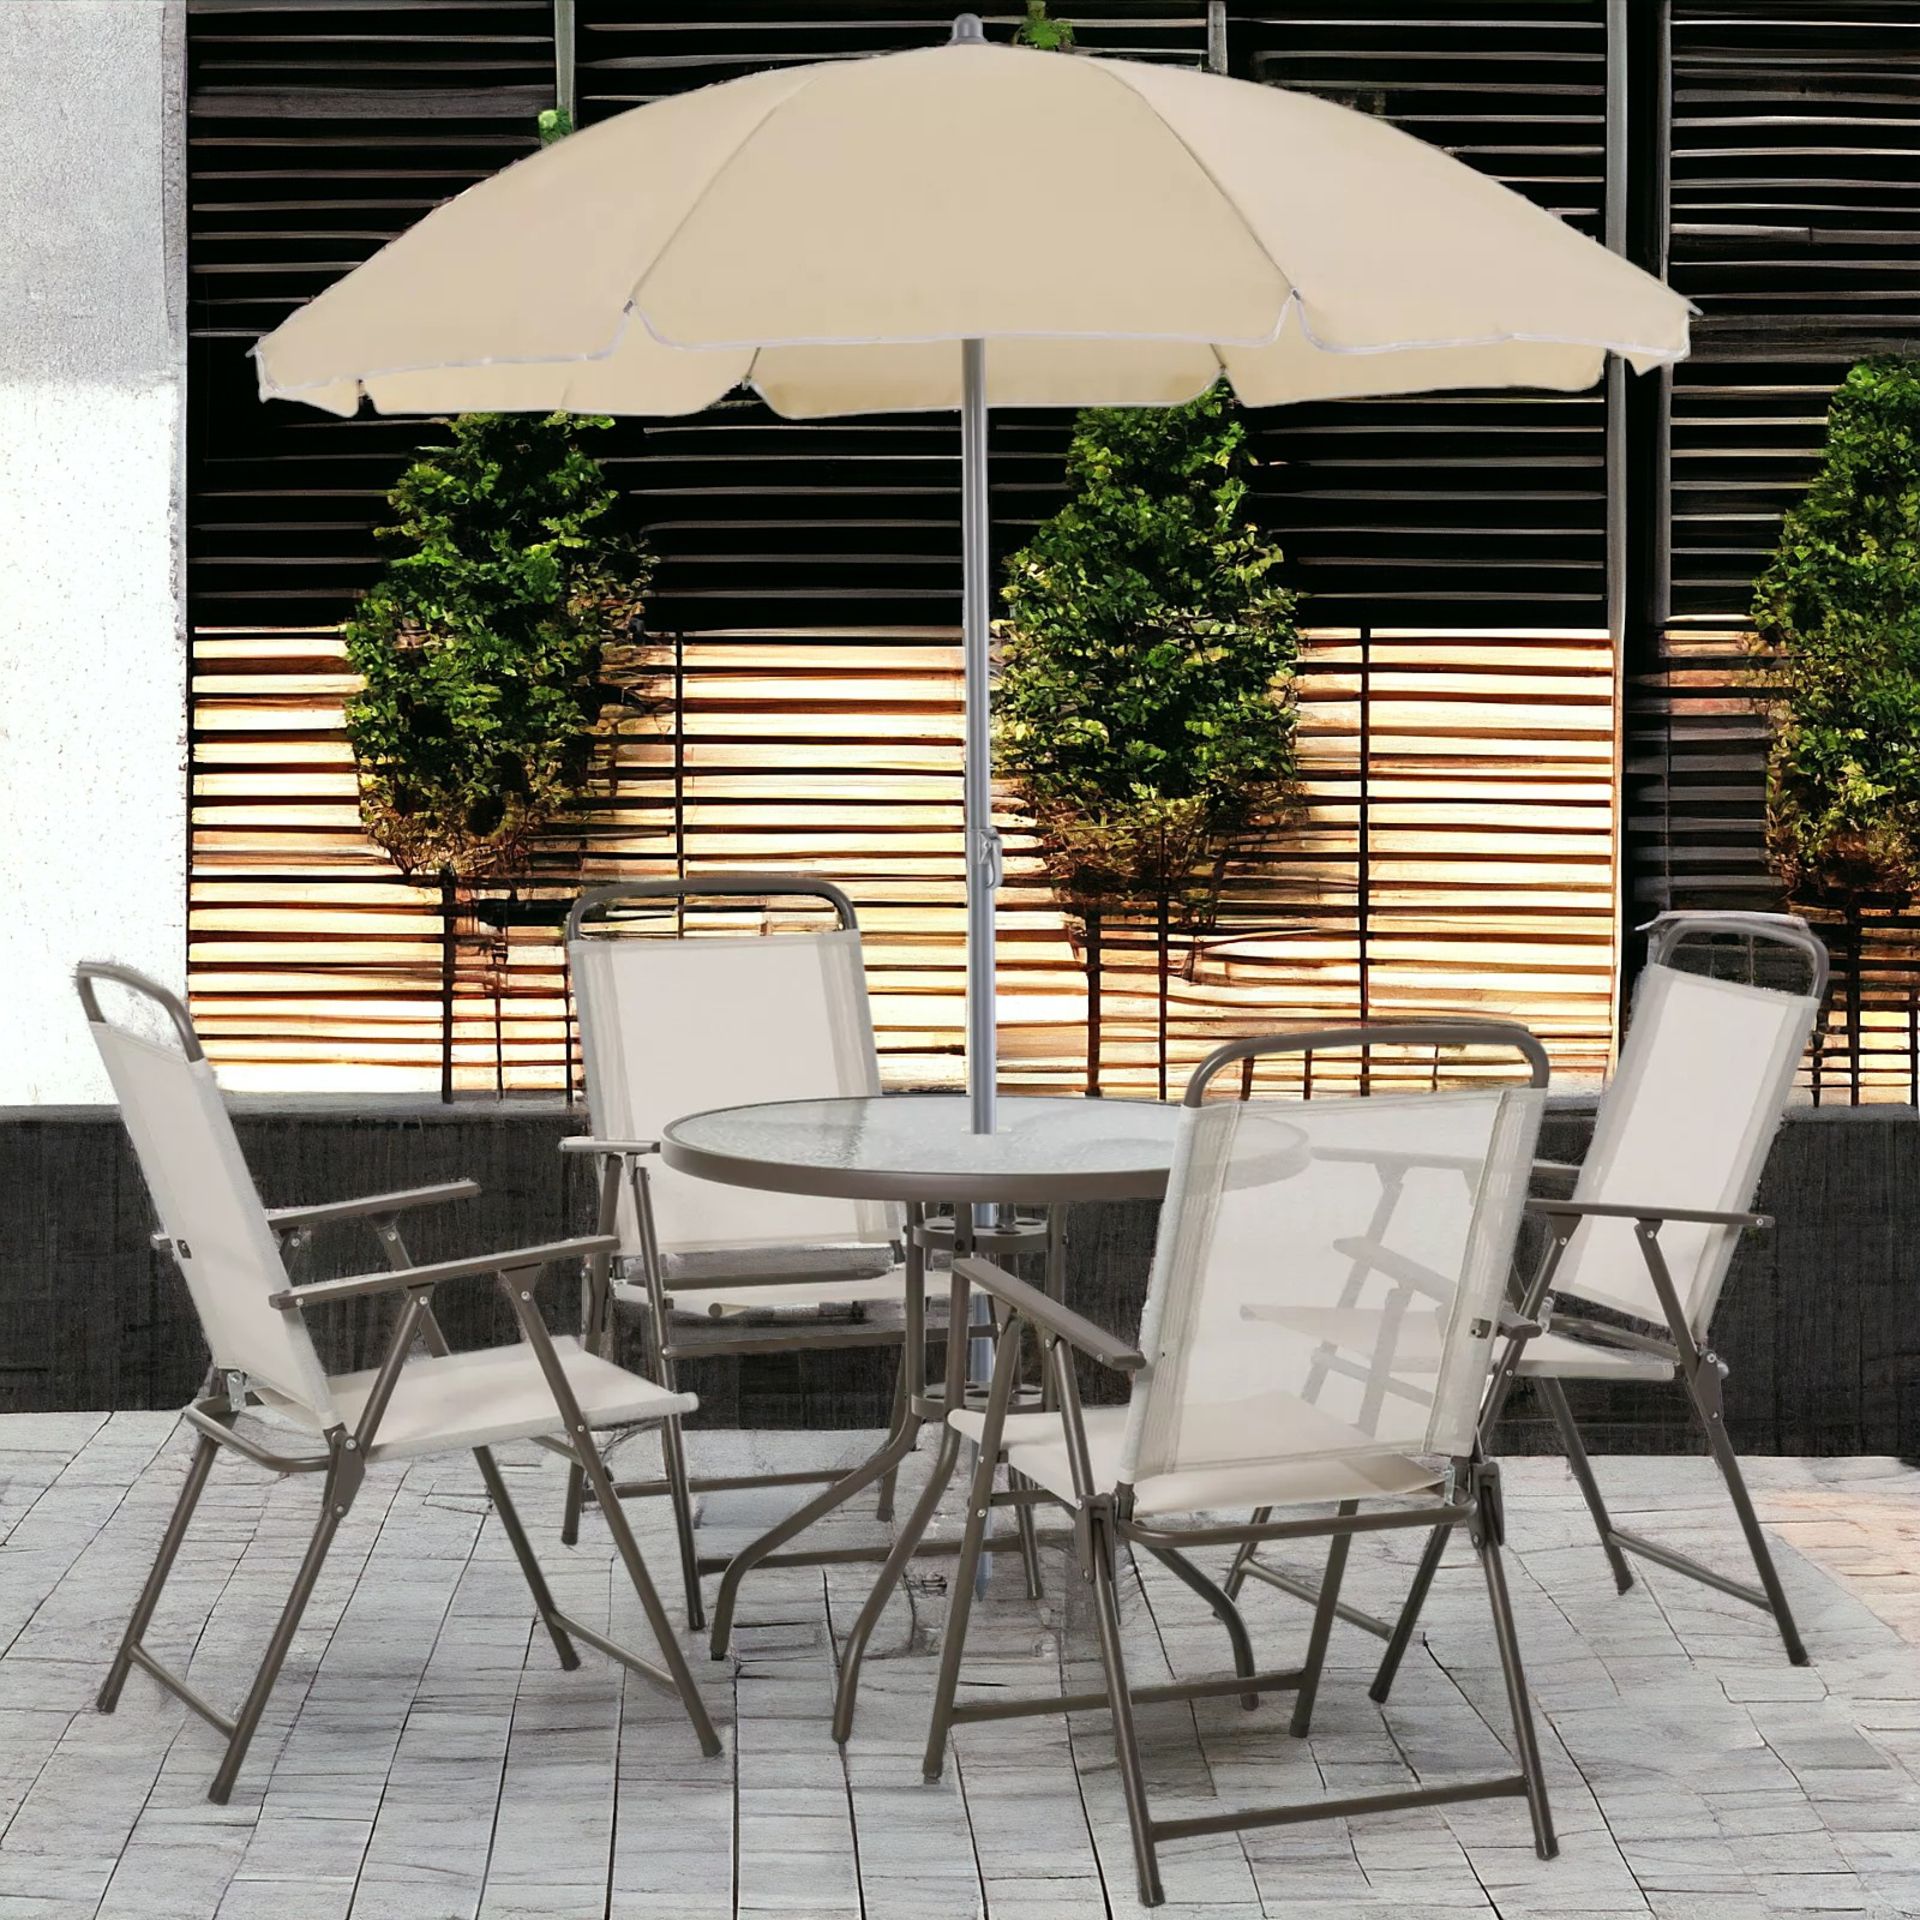 FREE DELIVERY- BRAND NEW 6PC GARDEN DINING SET OUTDOOR FURNITURE FOLDING CHAIRS TABLE PARASOL